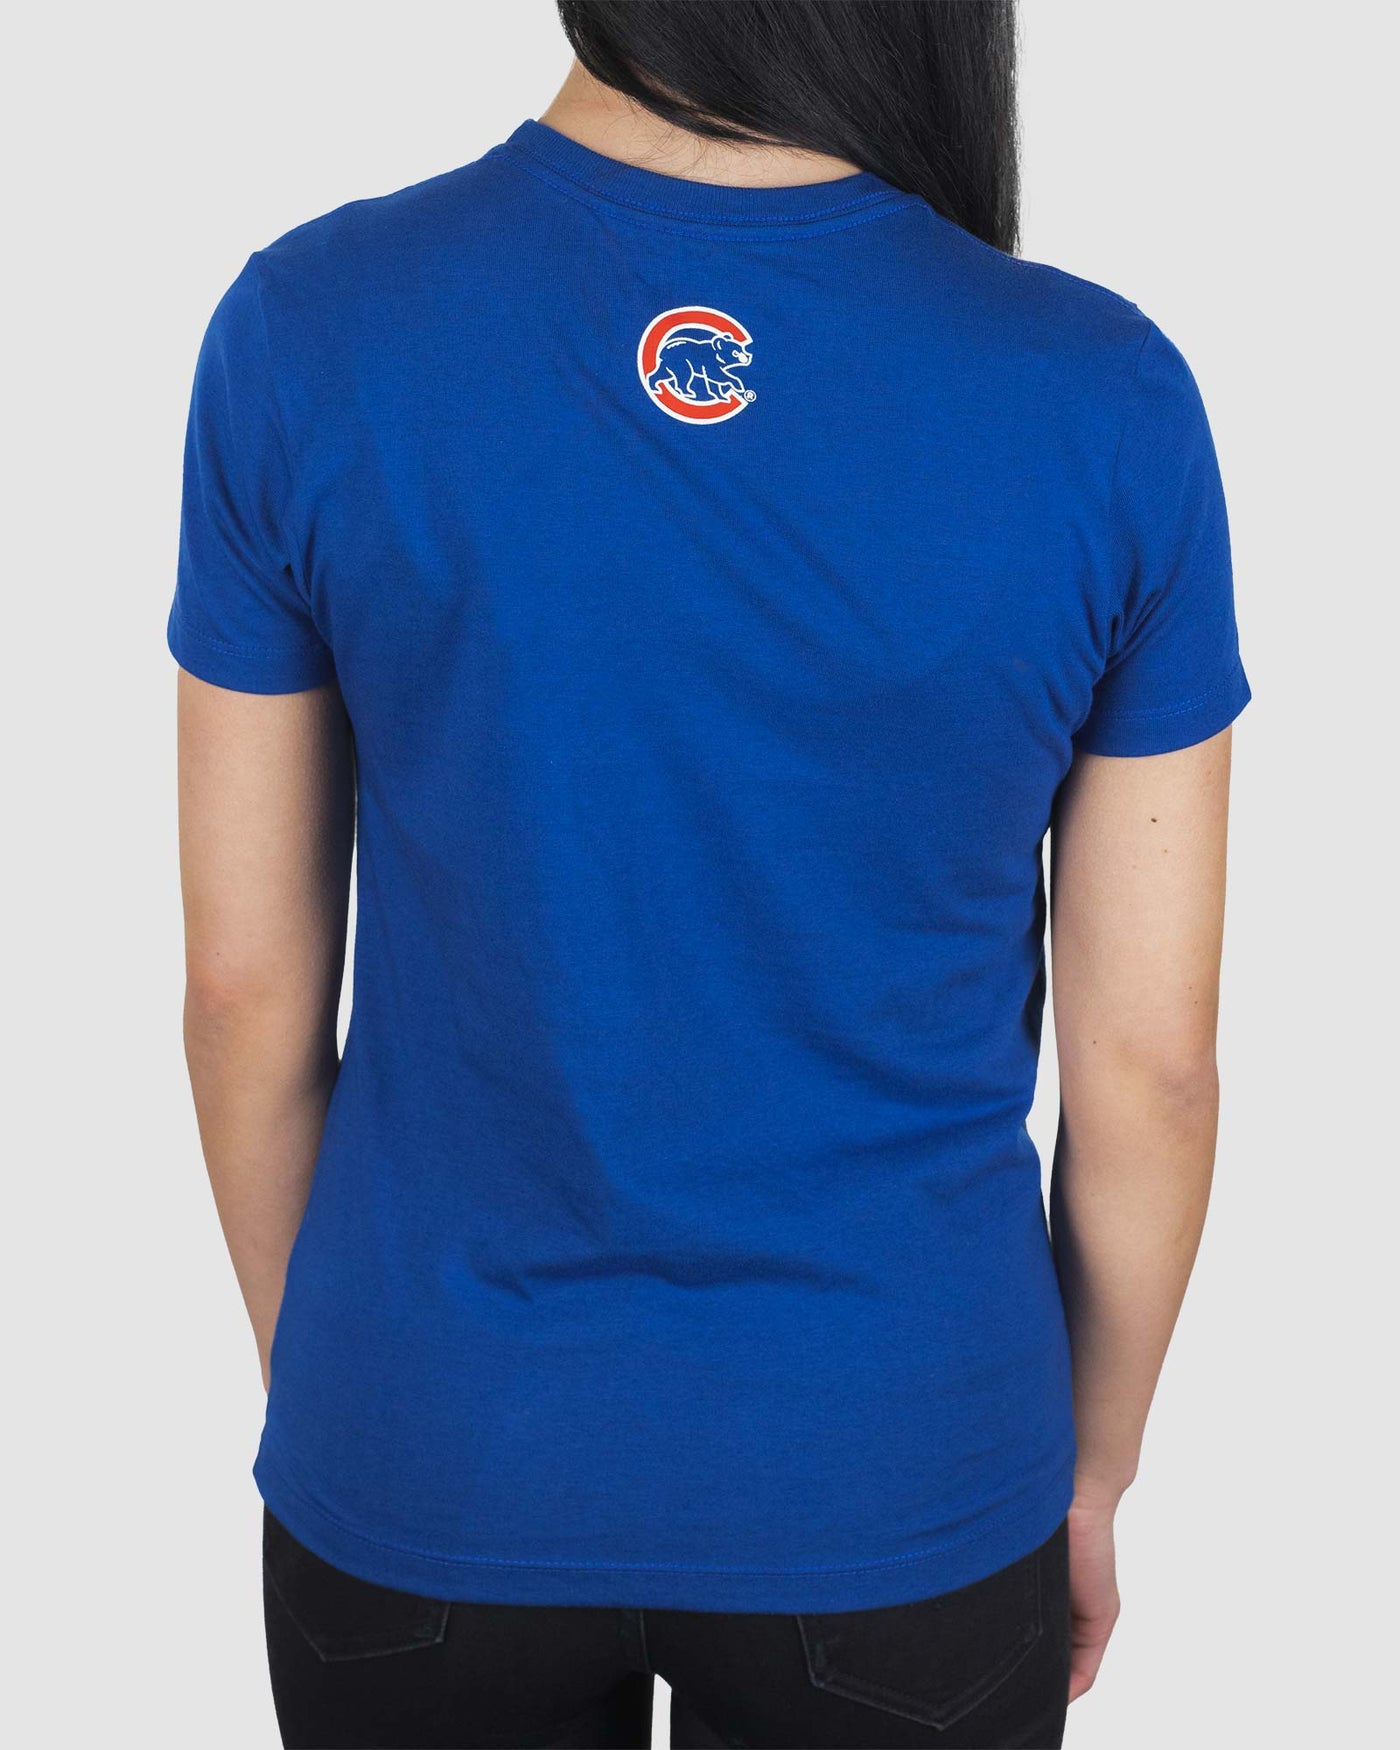 Get Your Peanuts! Women's Warm-Up Tee - Chicago Cubs